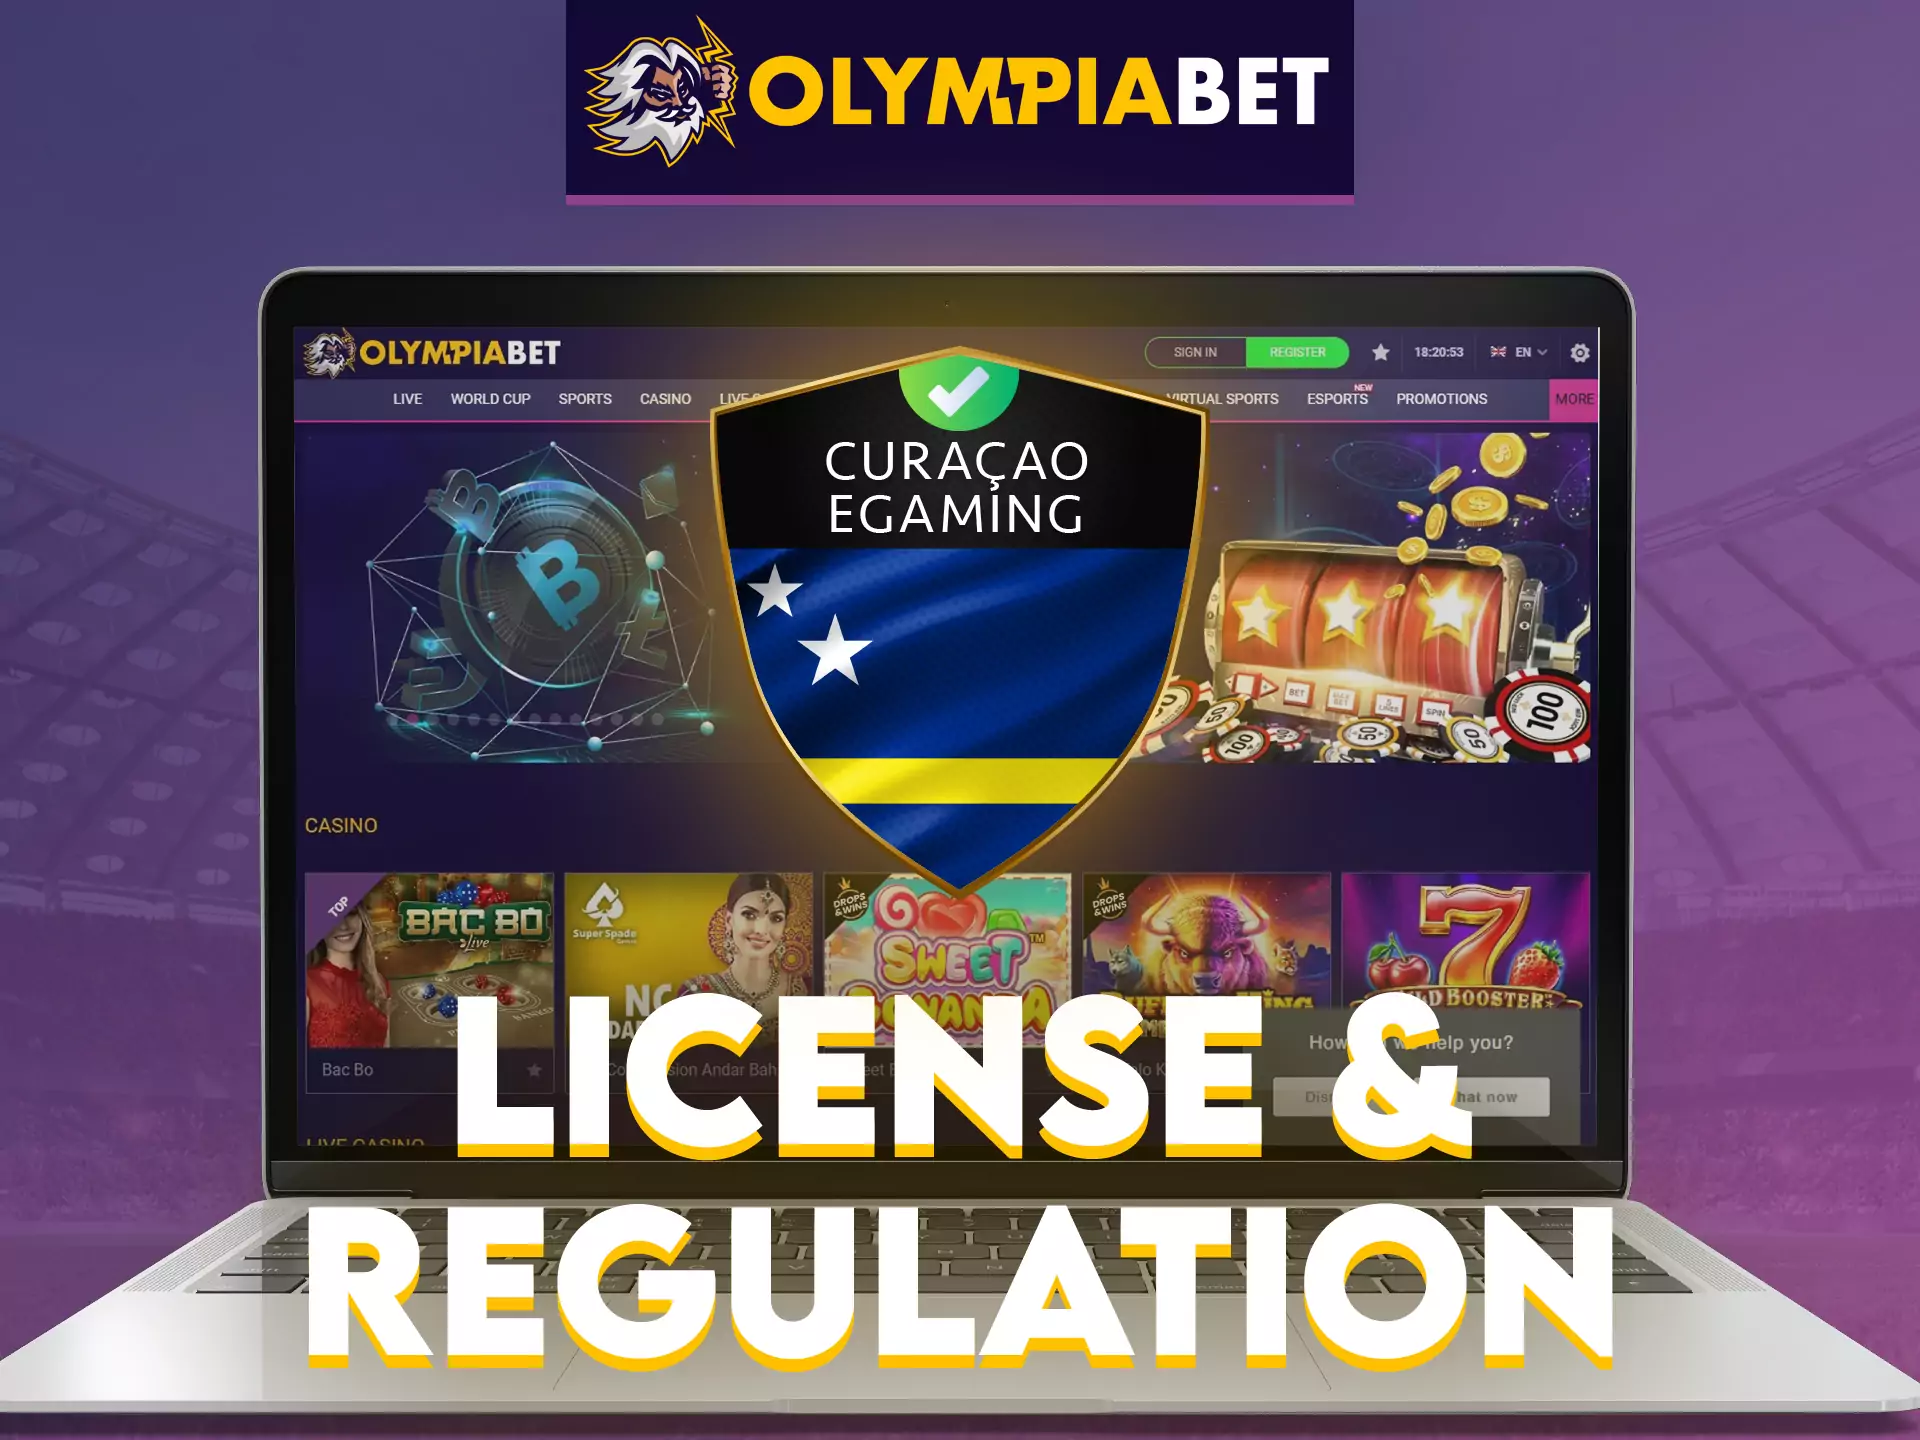 OlympiaBet has an official license and is absolutely legal and safe for players.